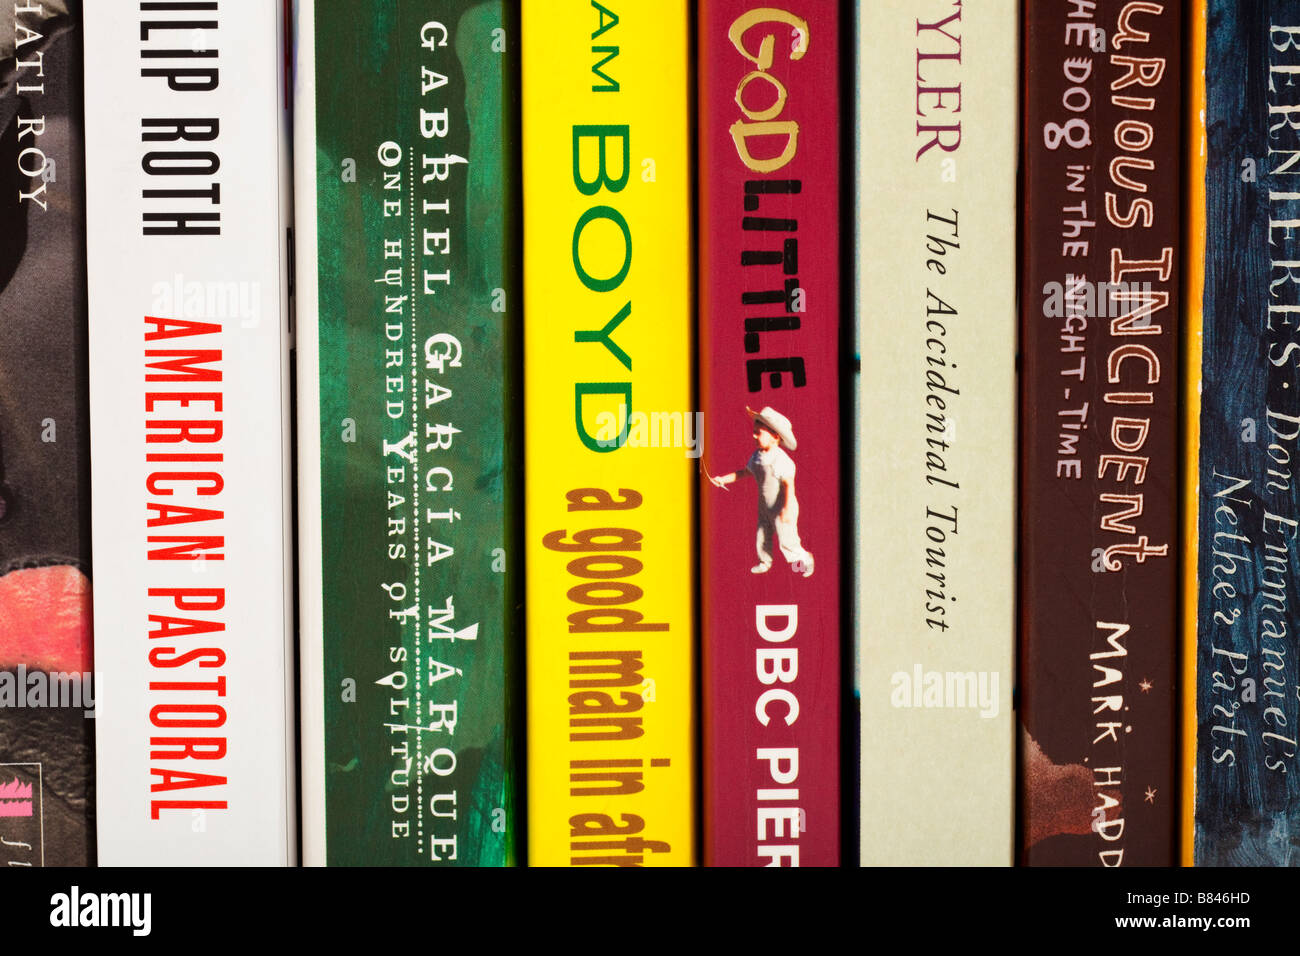 Close up row showing the spines of literary fiction books novels Stock Photo